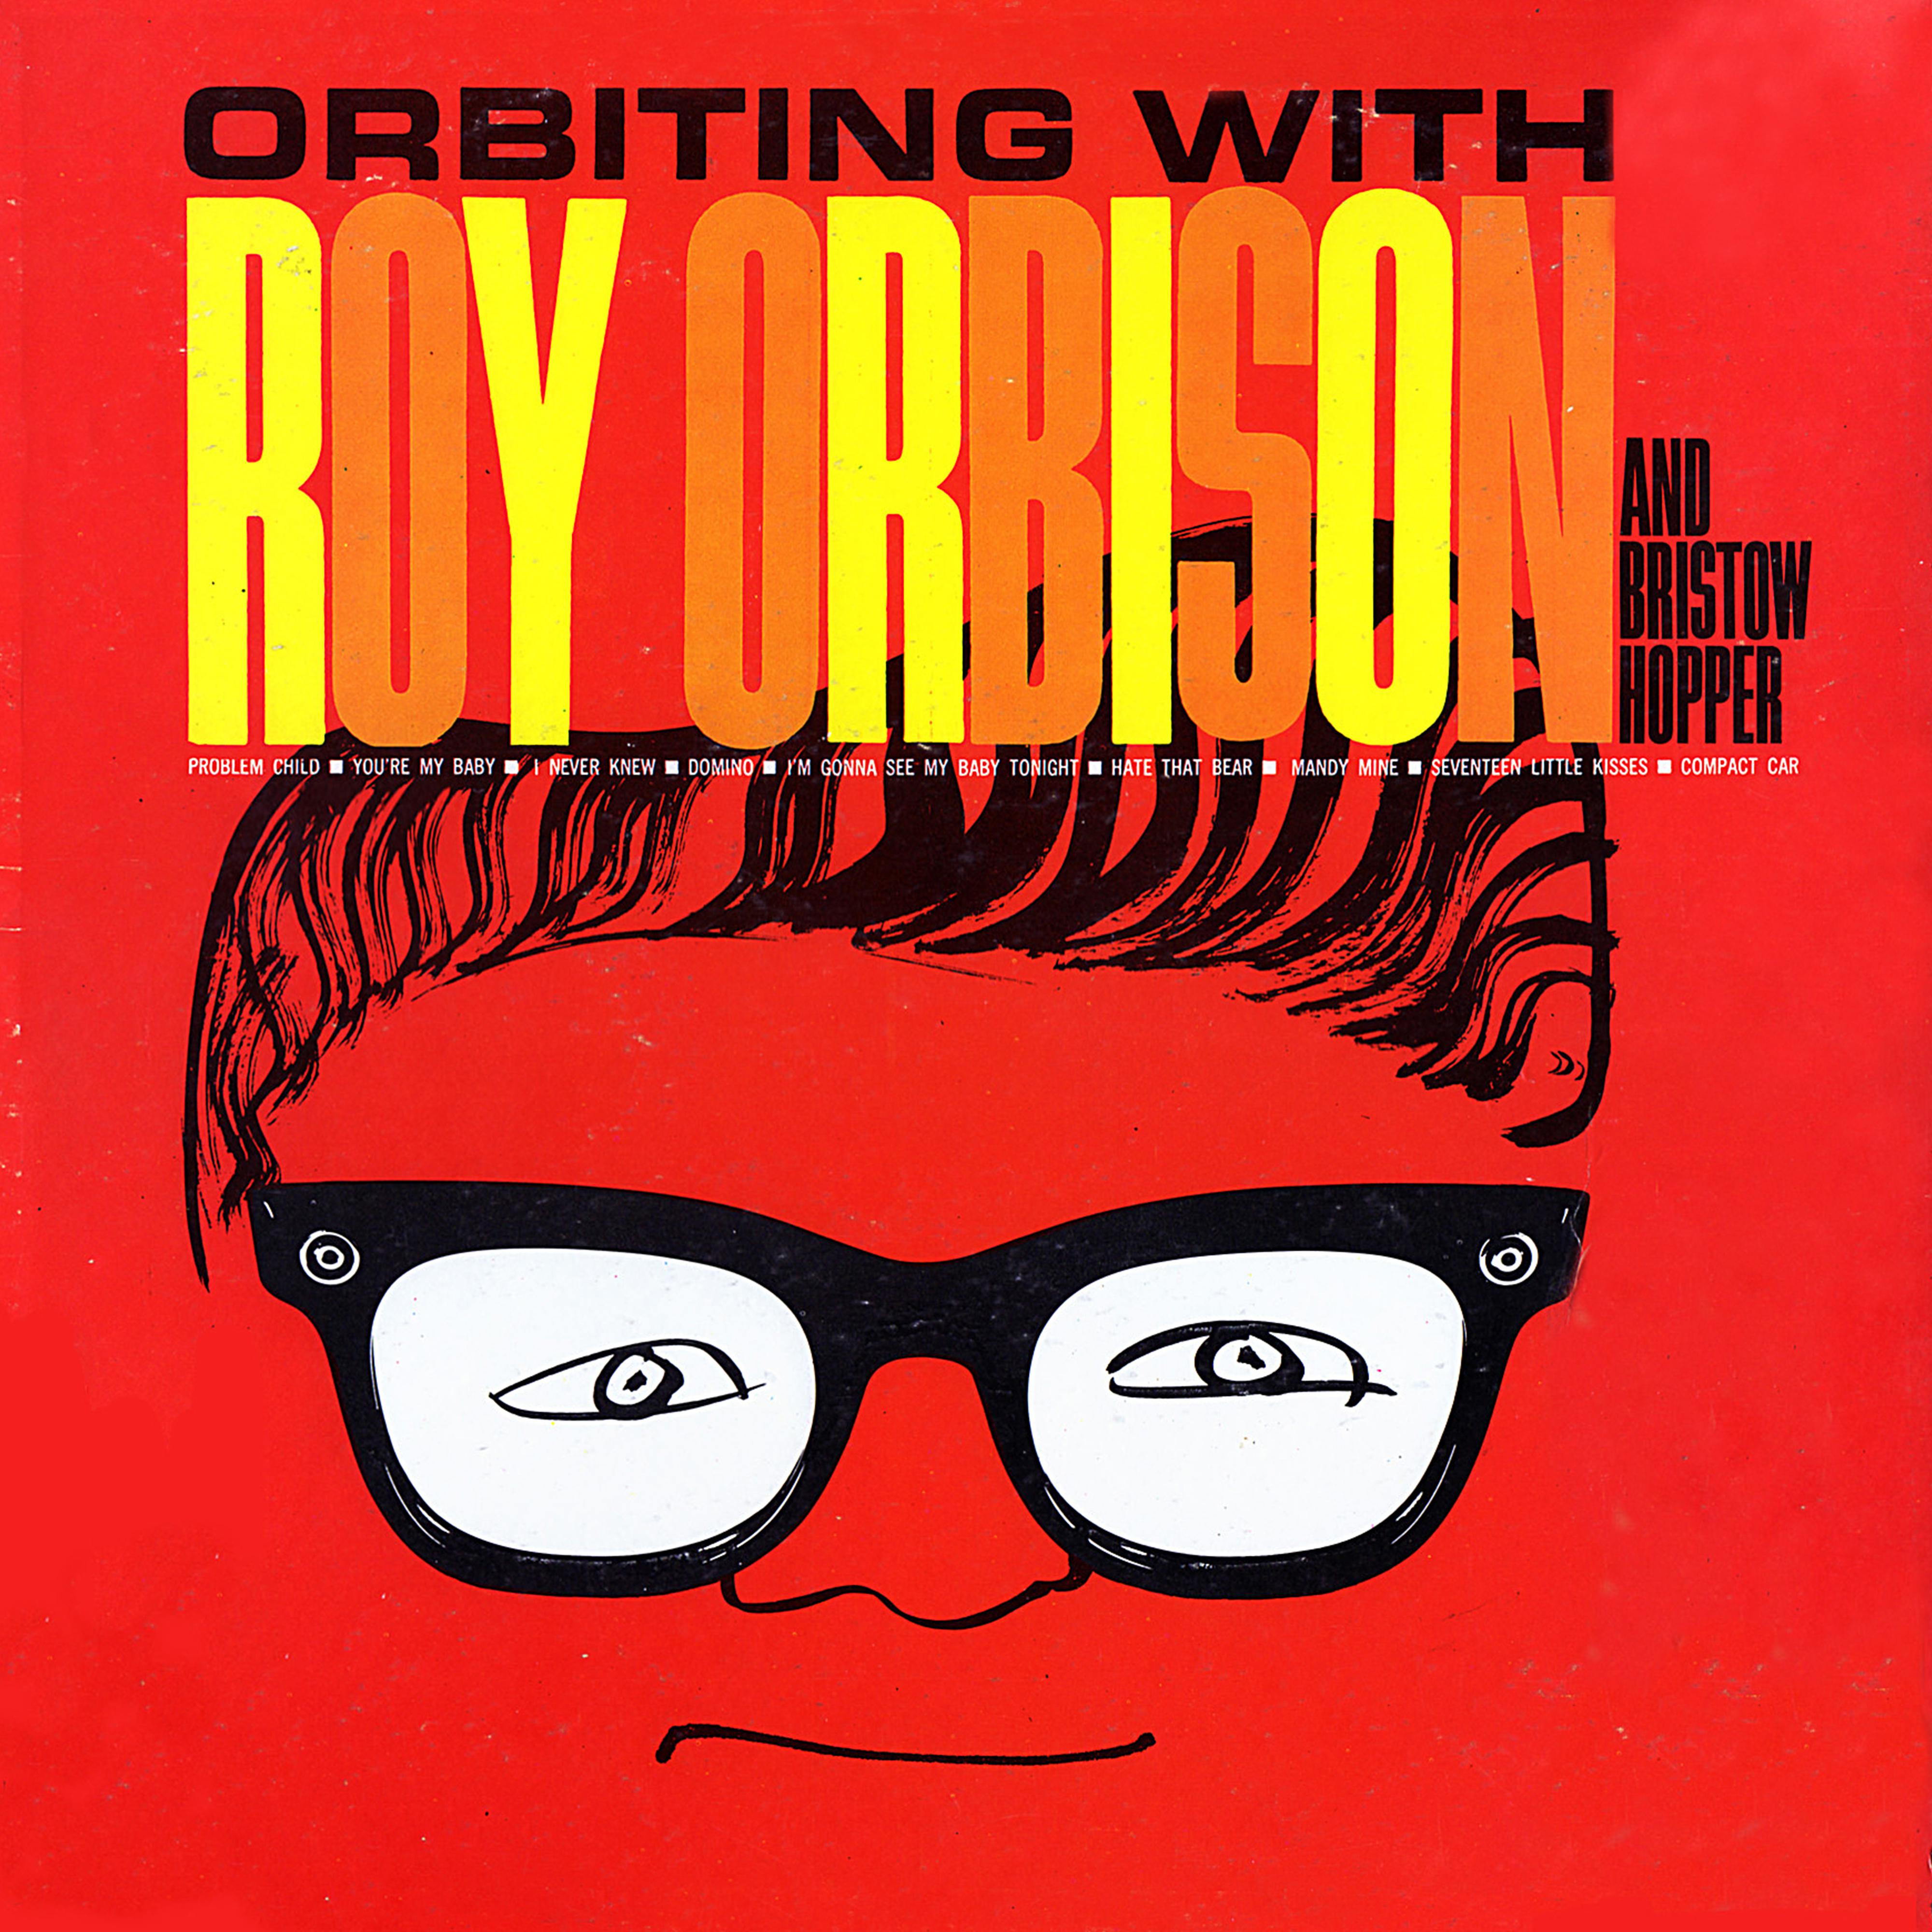 Orbiting With Orbison